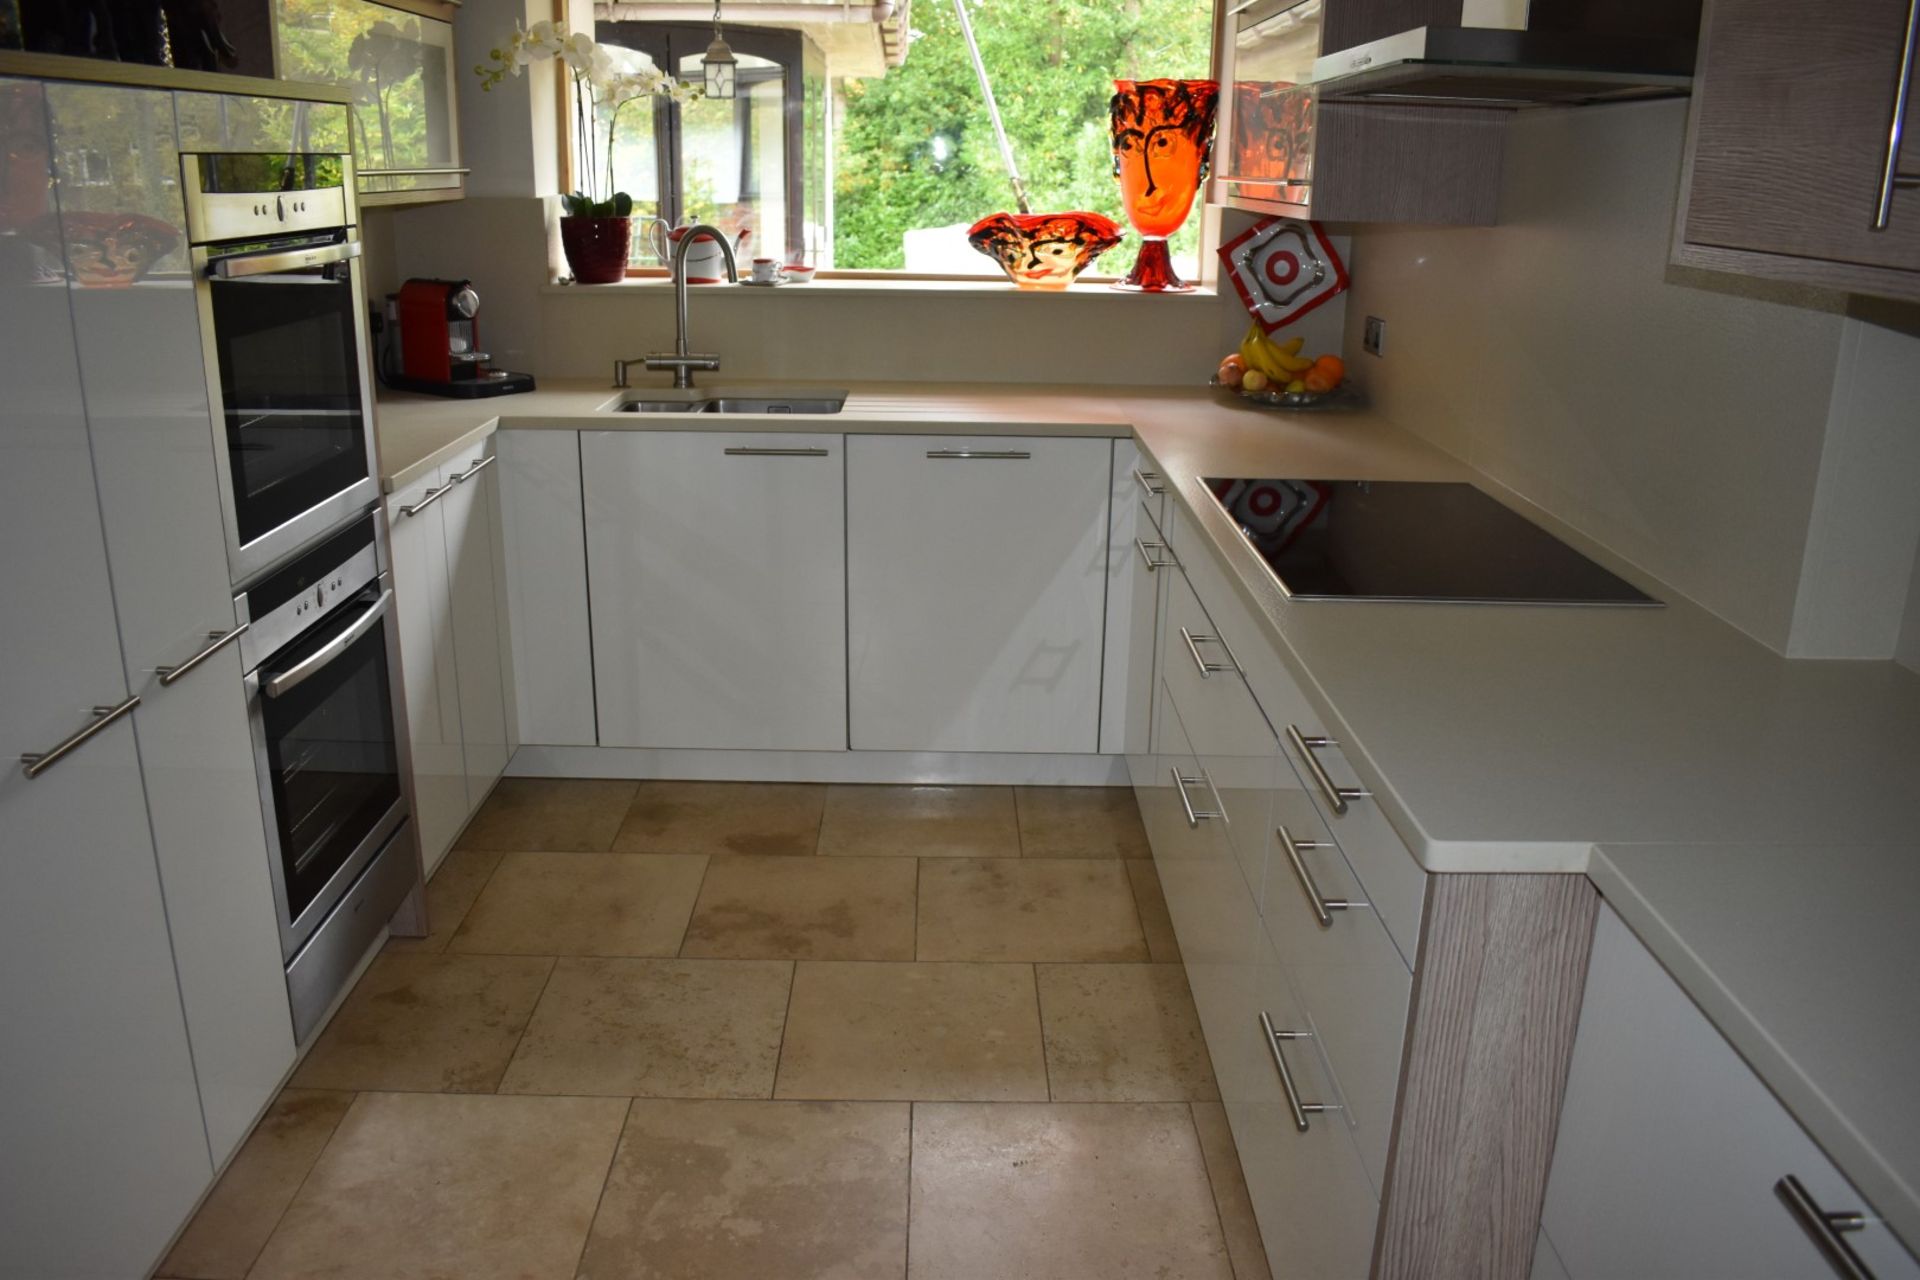 1 x Pronorm Einbauküchen German Made Fitted Kitchen With Contemporary High Gloss Cream Doors and - Image 25 of 51